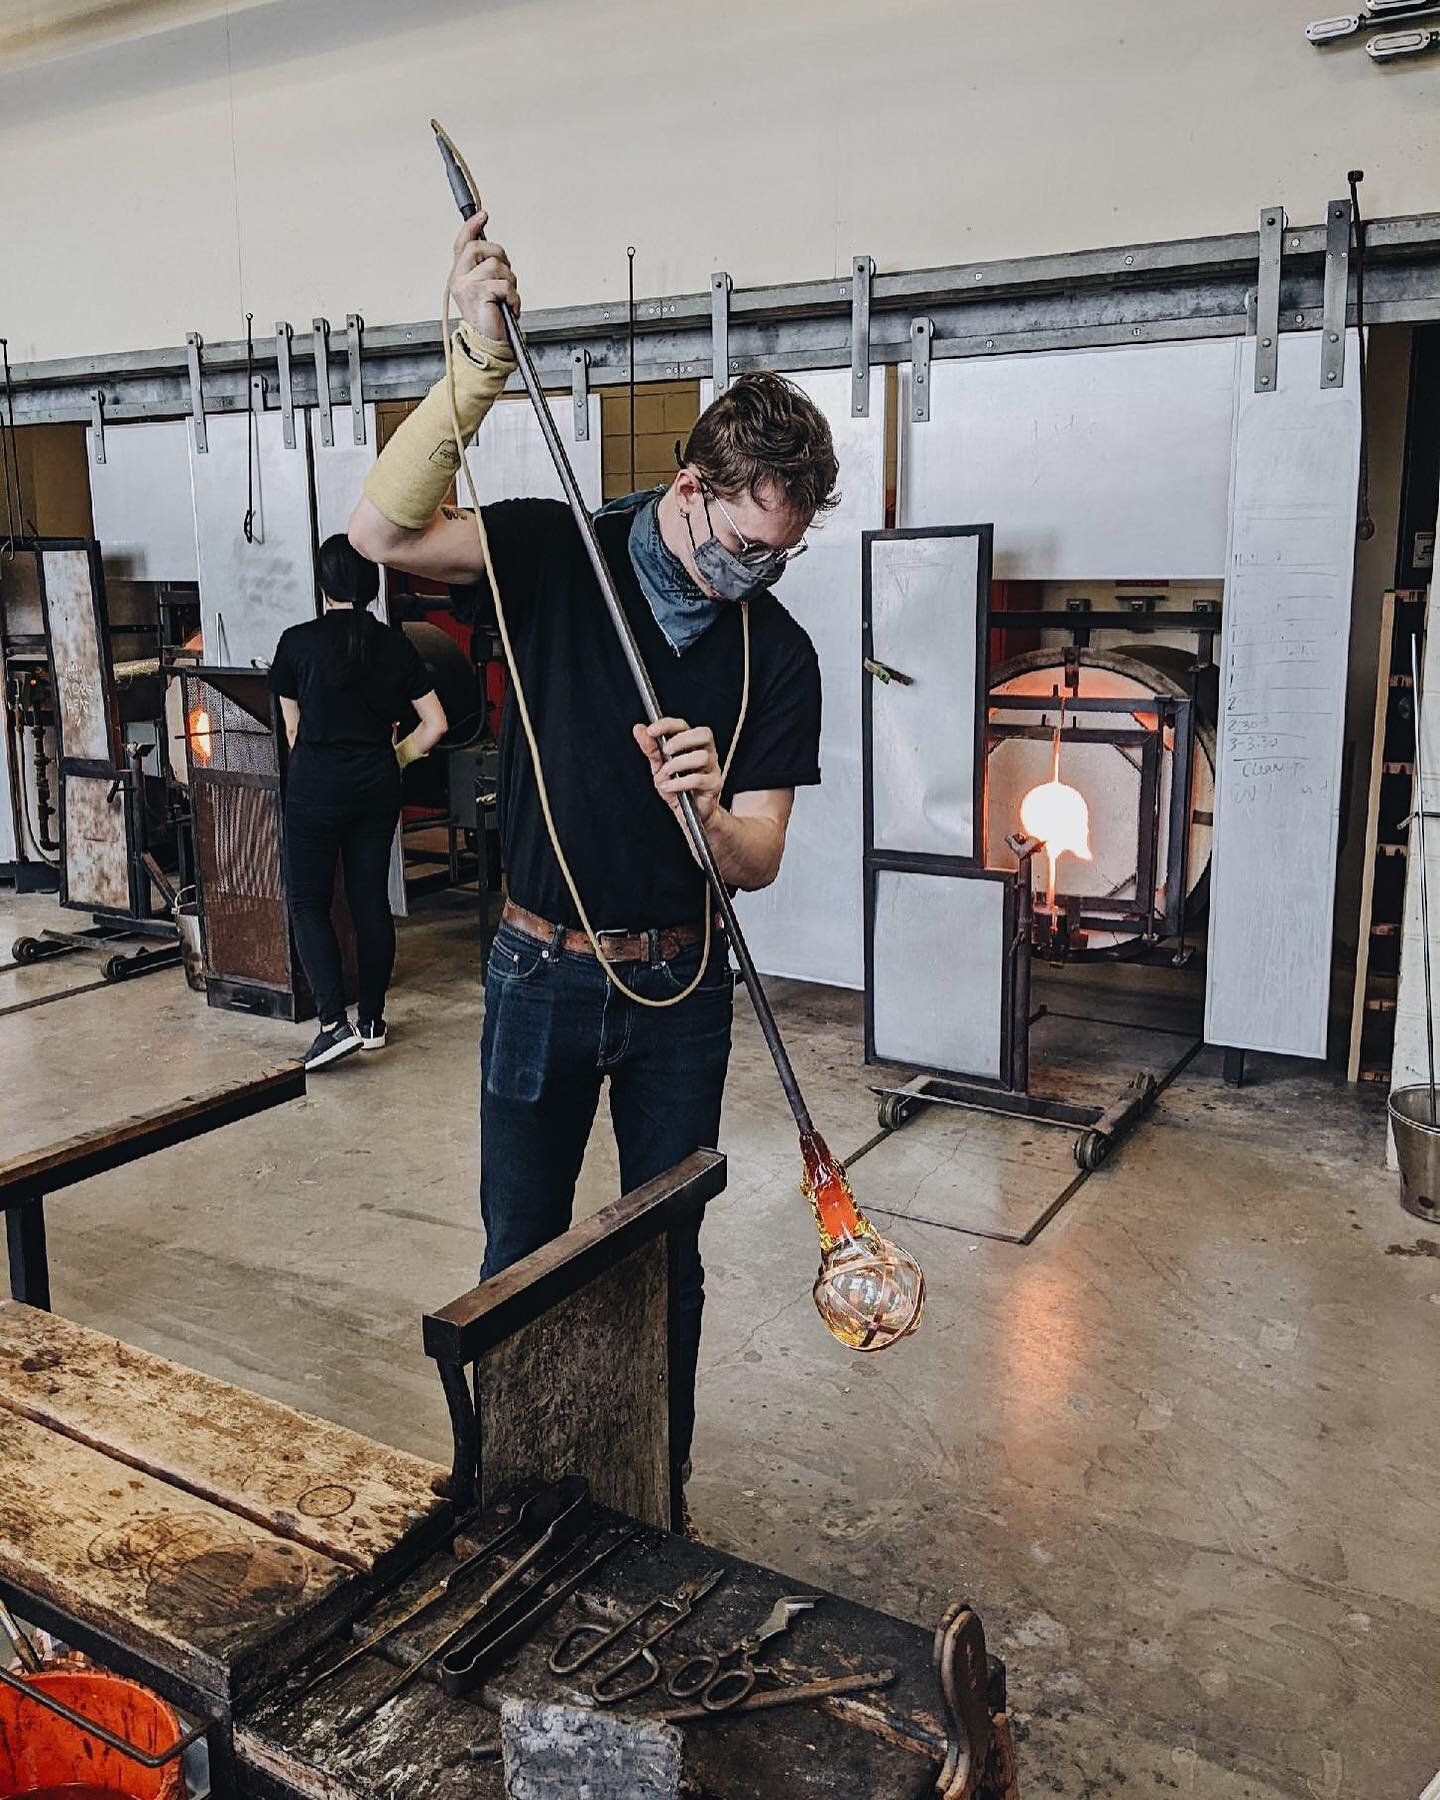 The melding of molten glass and metal into absurd and functional forms
.
.
.
.
Over the course of the past couple of months I&rsquo;ve had the opportunity to explore glass as a medium. All of this culminating in a final piece for which I have chosen 